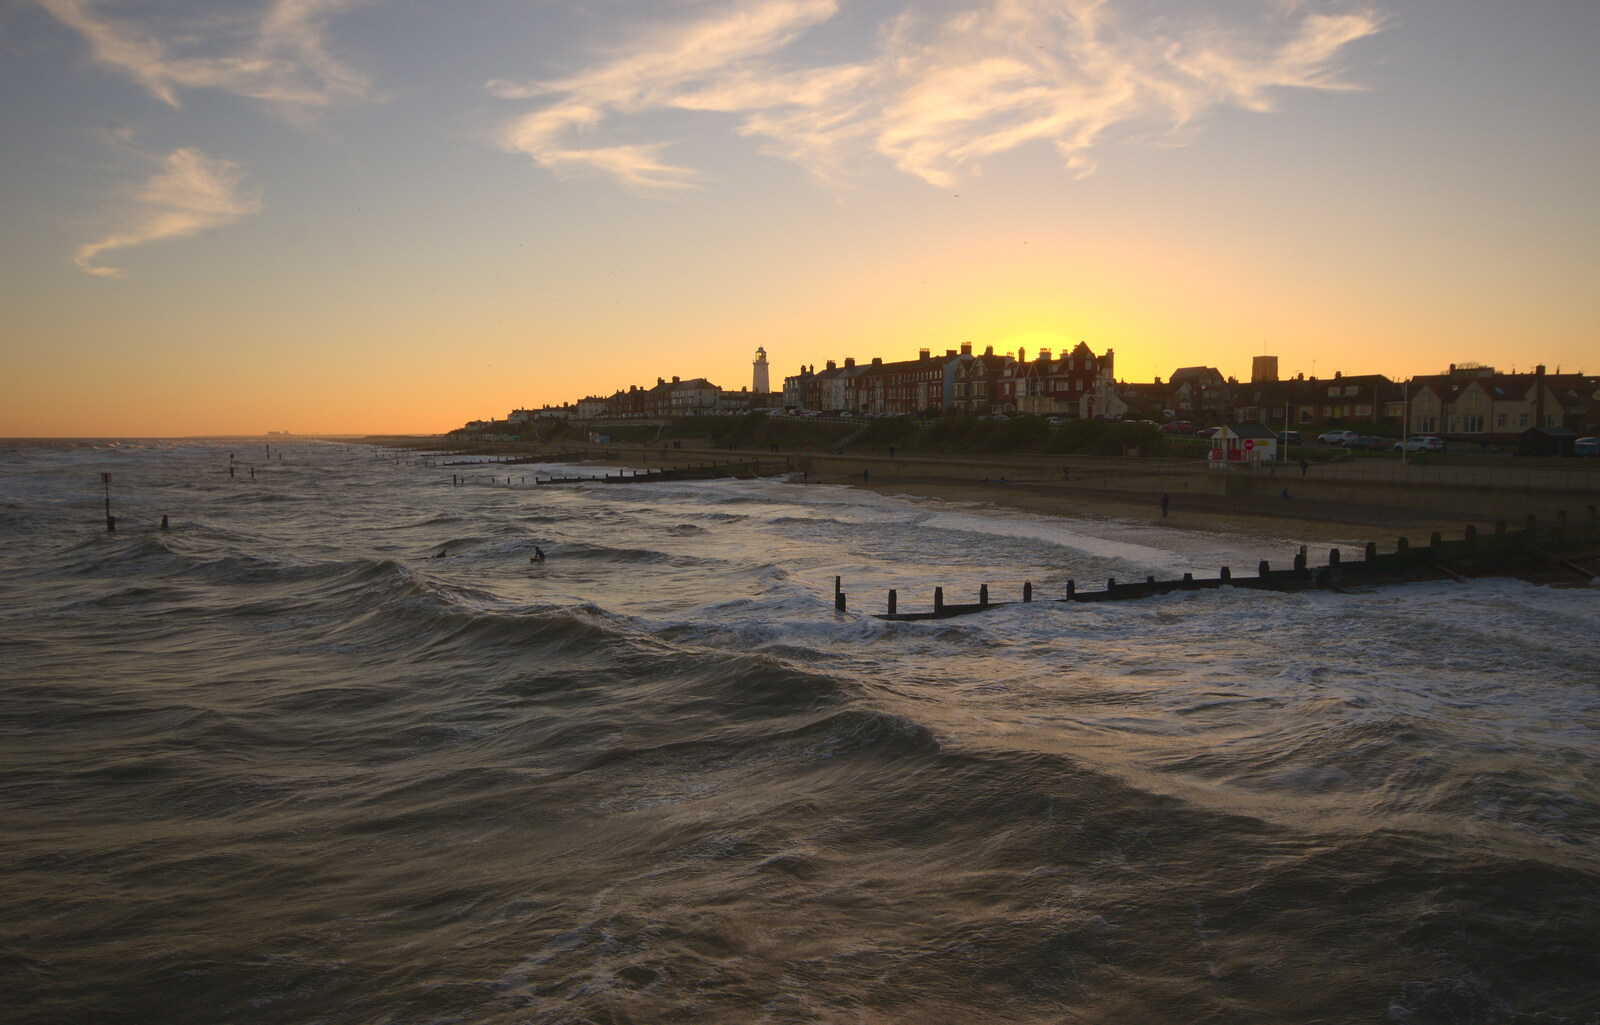 Southwold in the sunset from Sunset at the Beach, Southwold, Suffolk - 18th November 2018